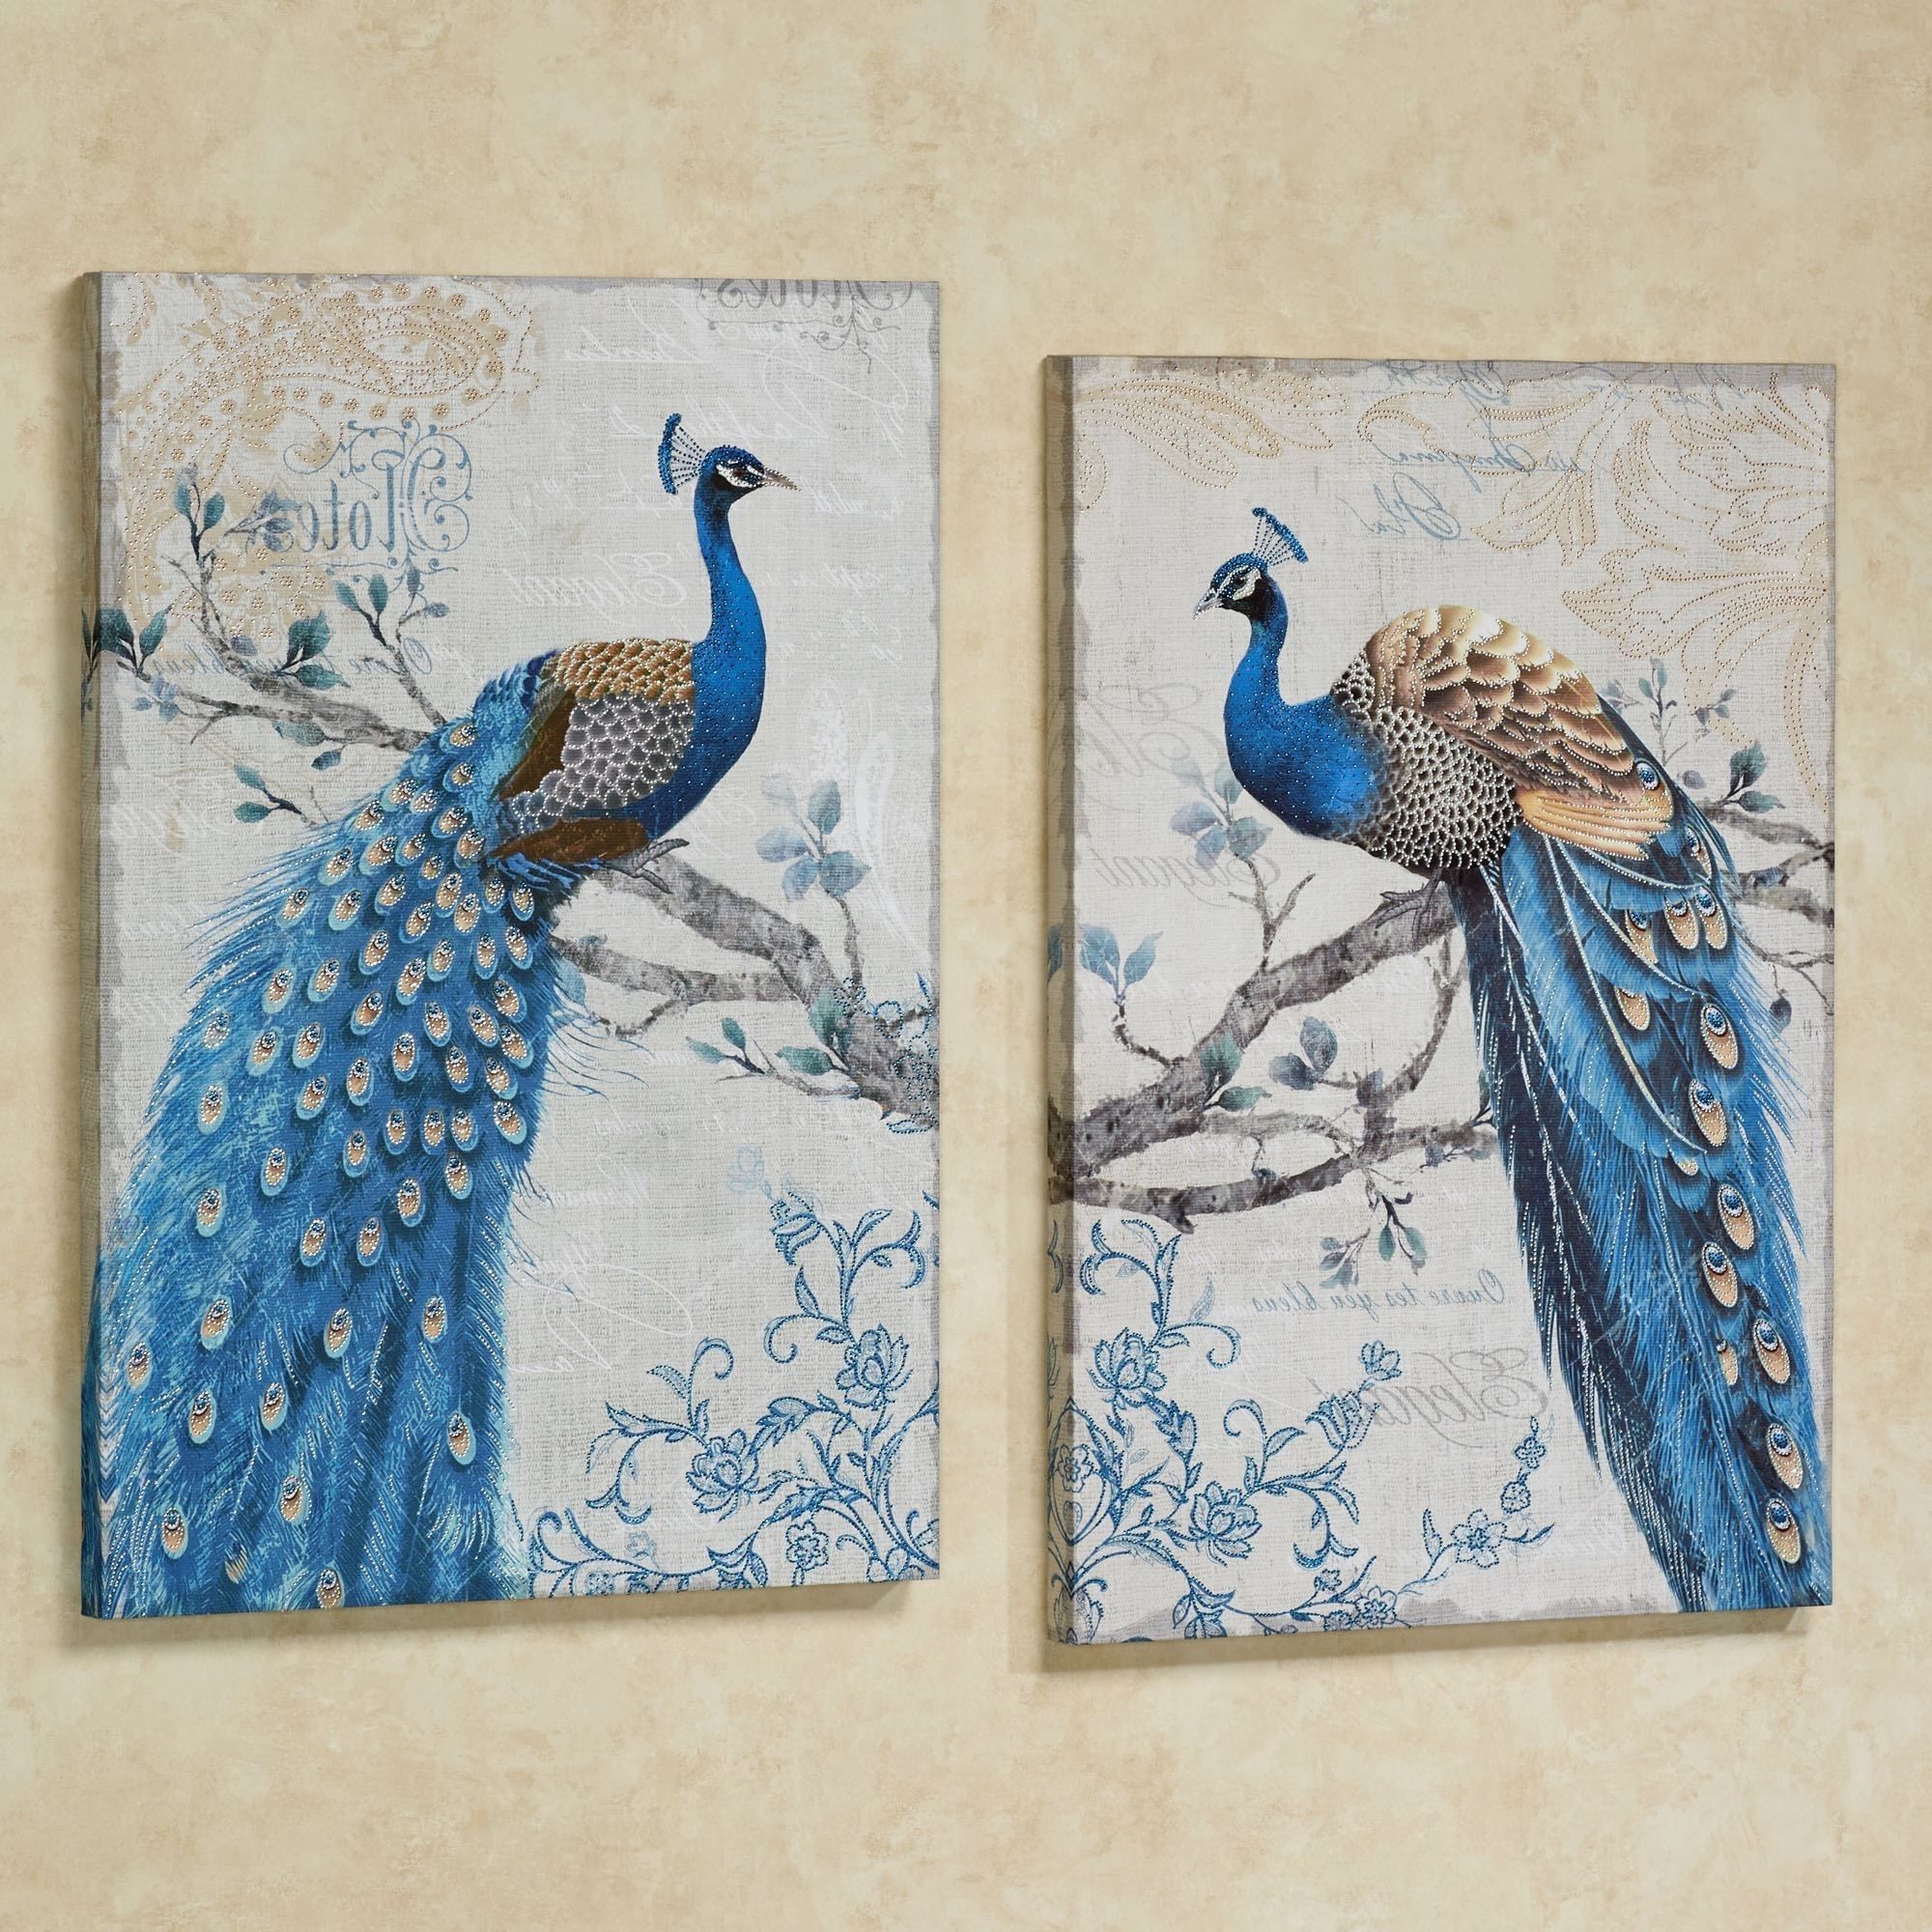 Preferred Magnificent Peacock Giclee Canvas Wall Art Set For Cheap Wall Art Canvas Sets 